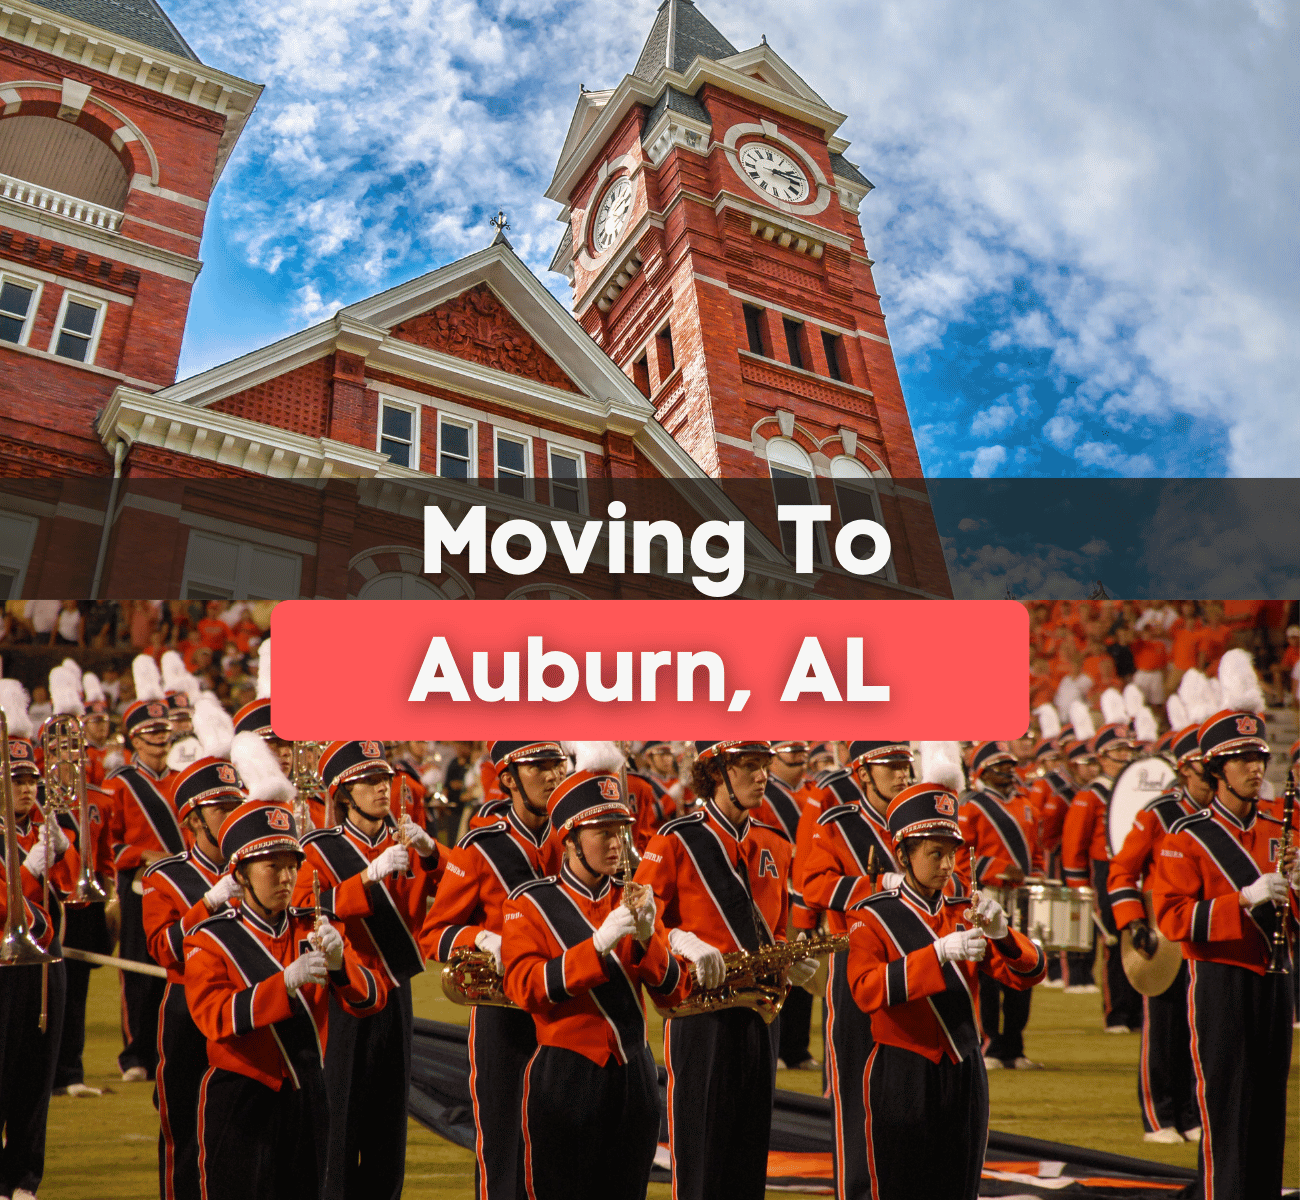 moving to Auburn, AL graphic with Auburn University marching band and building